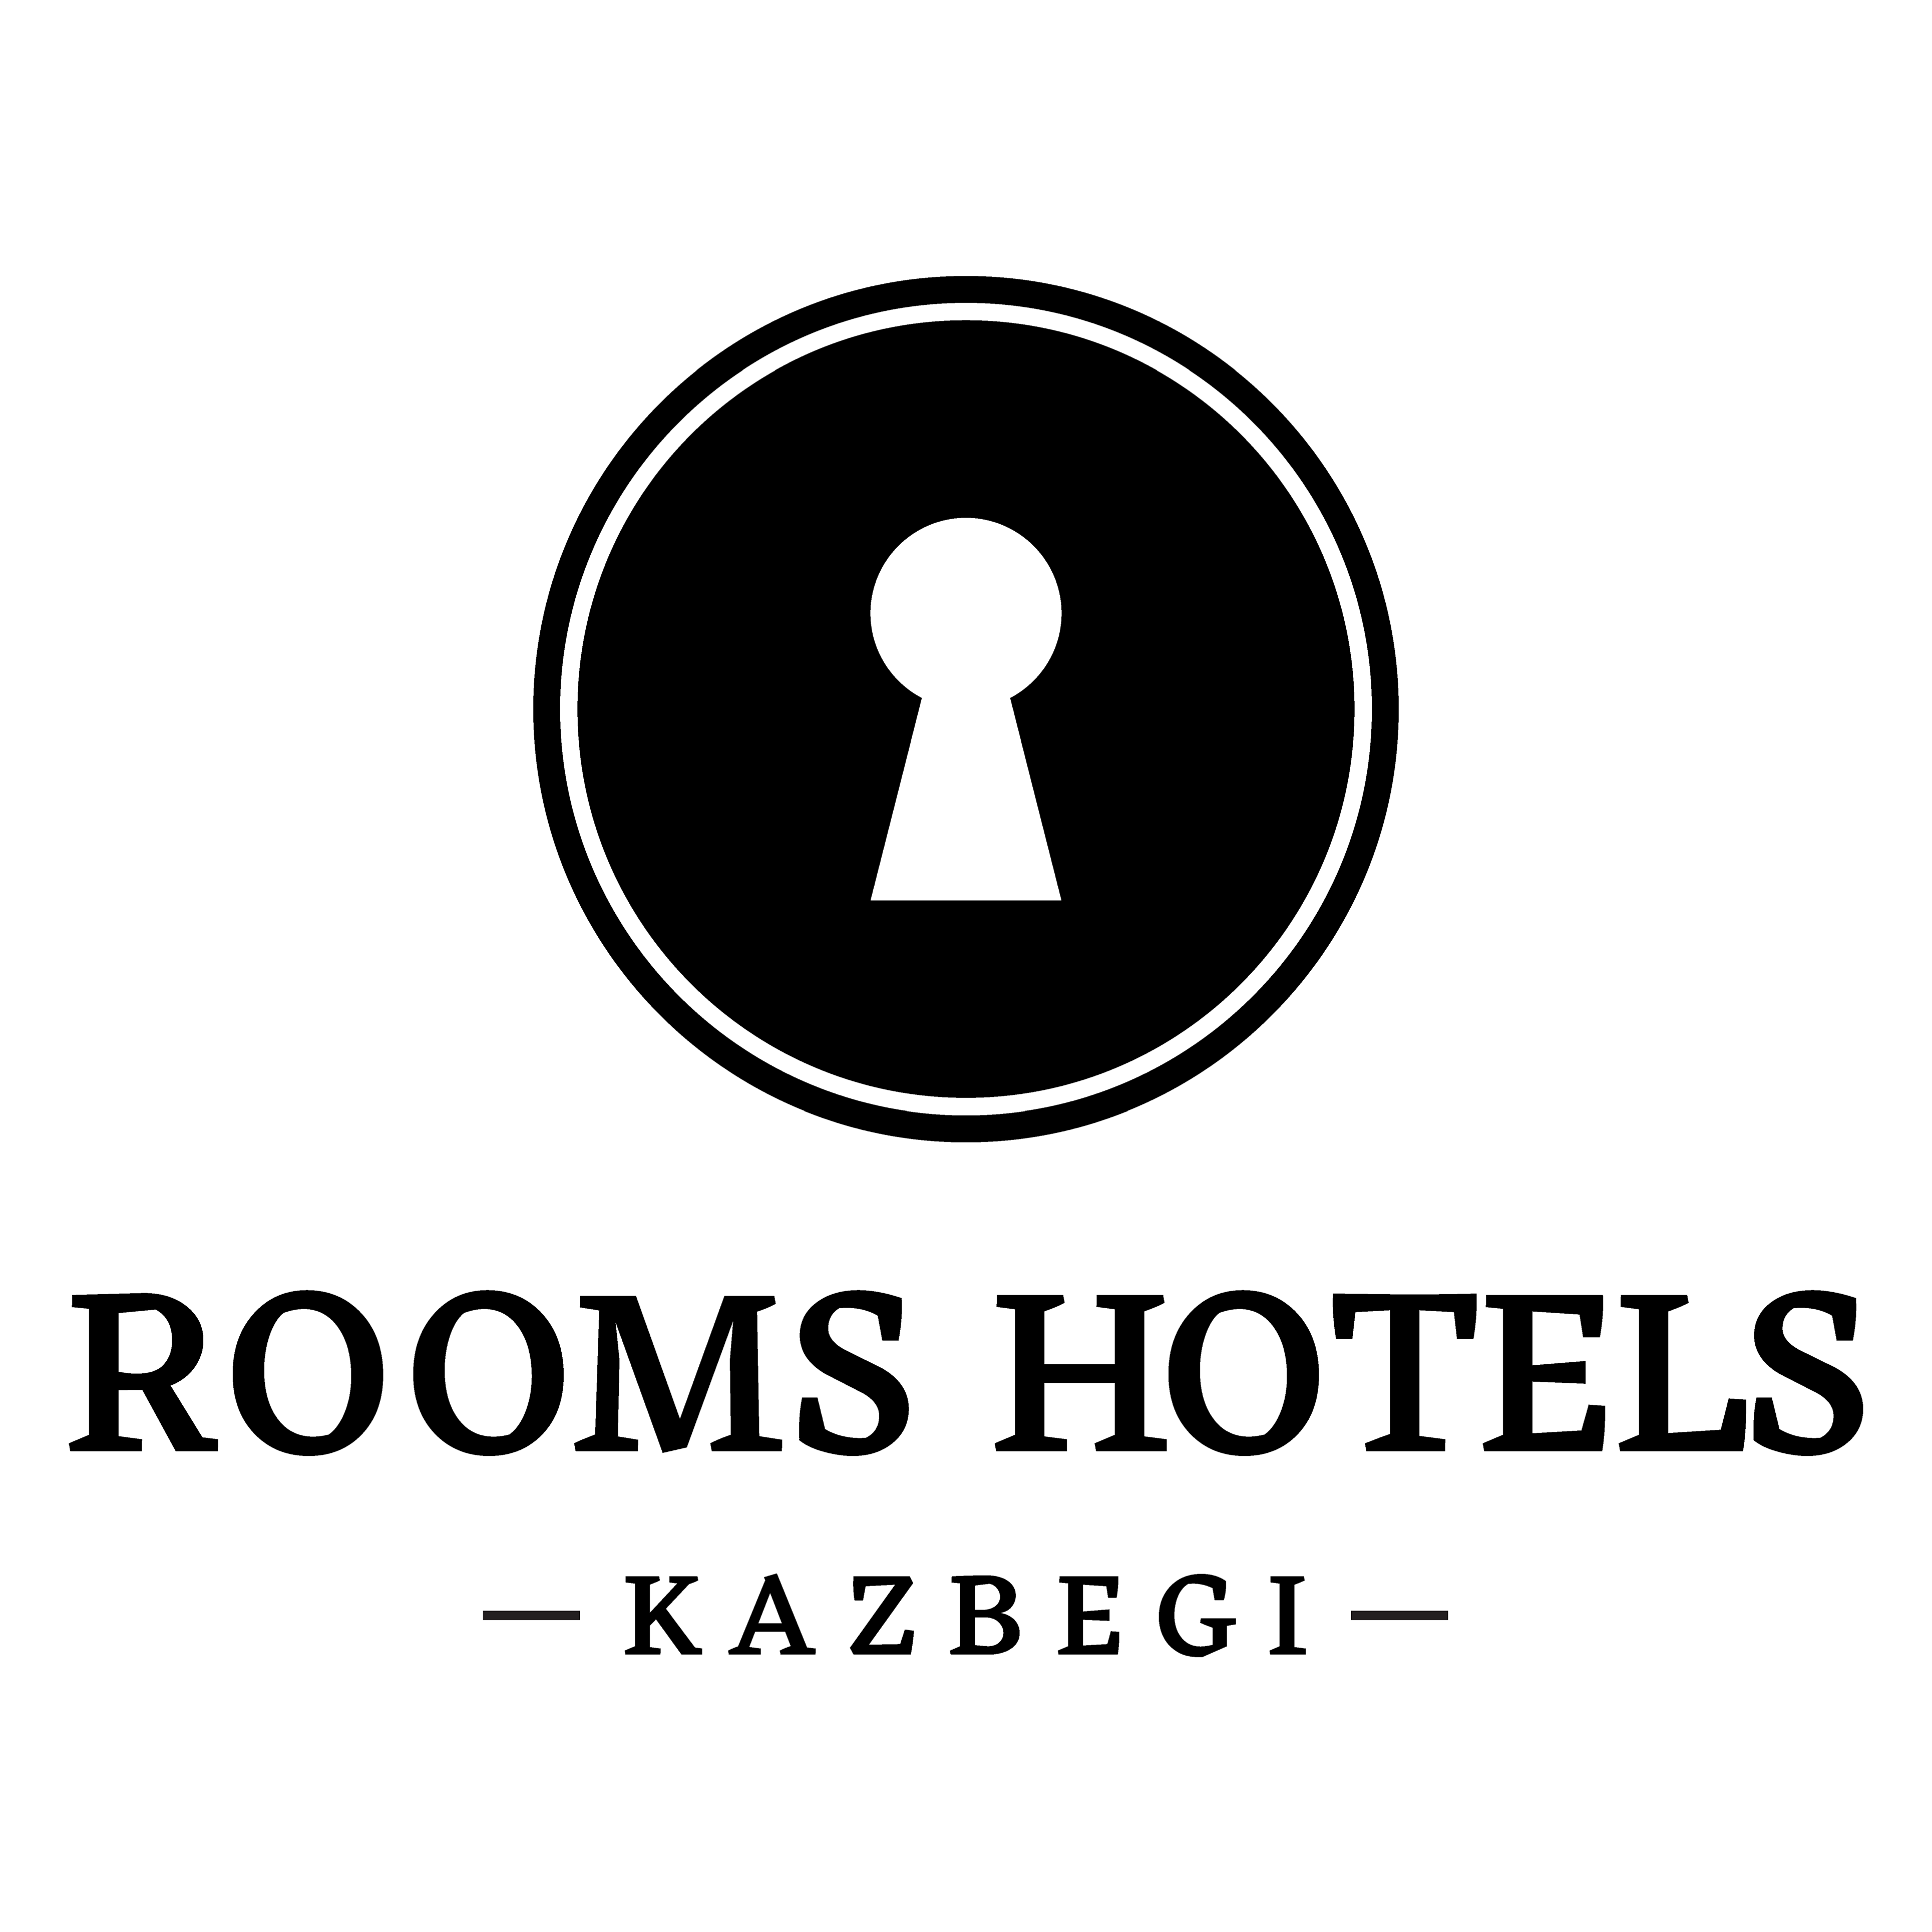 Rooms hotel